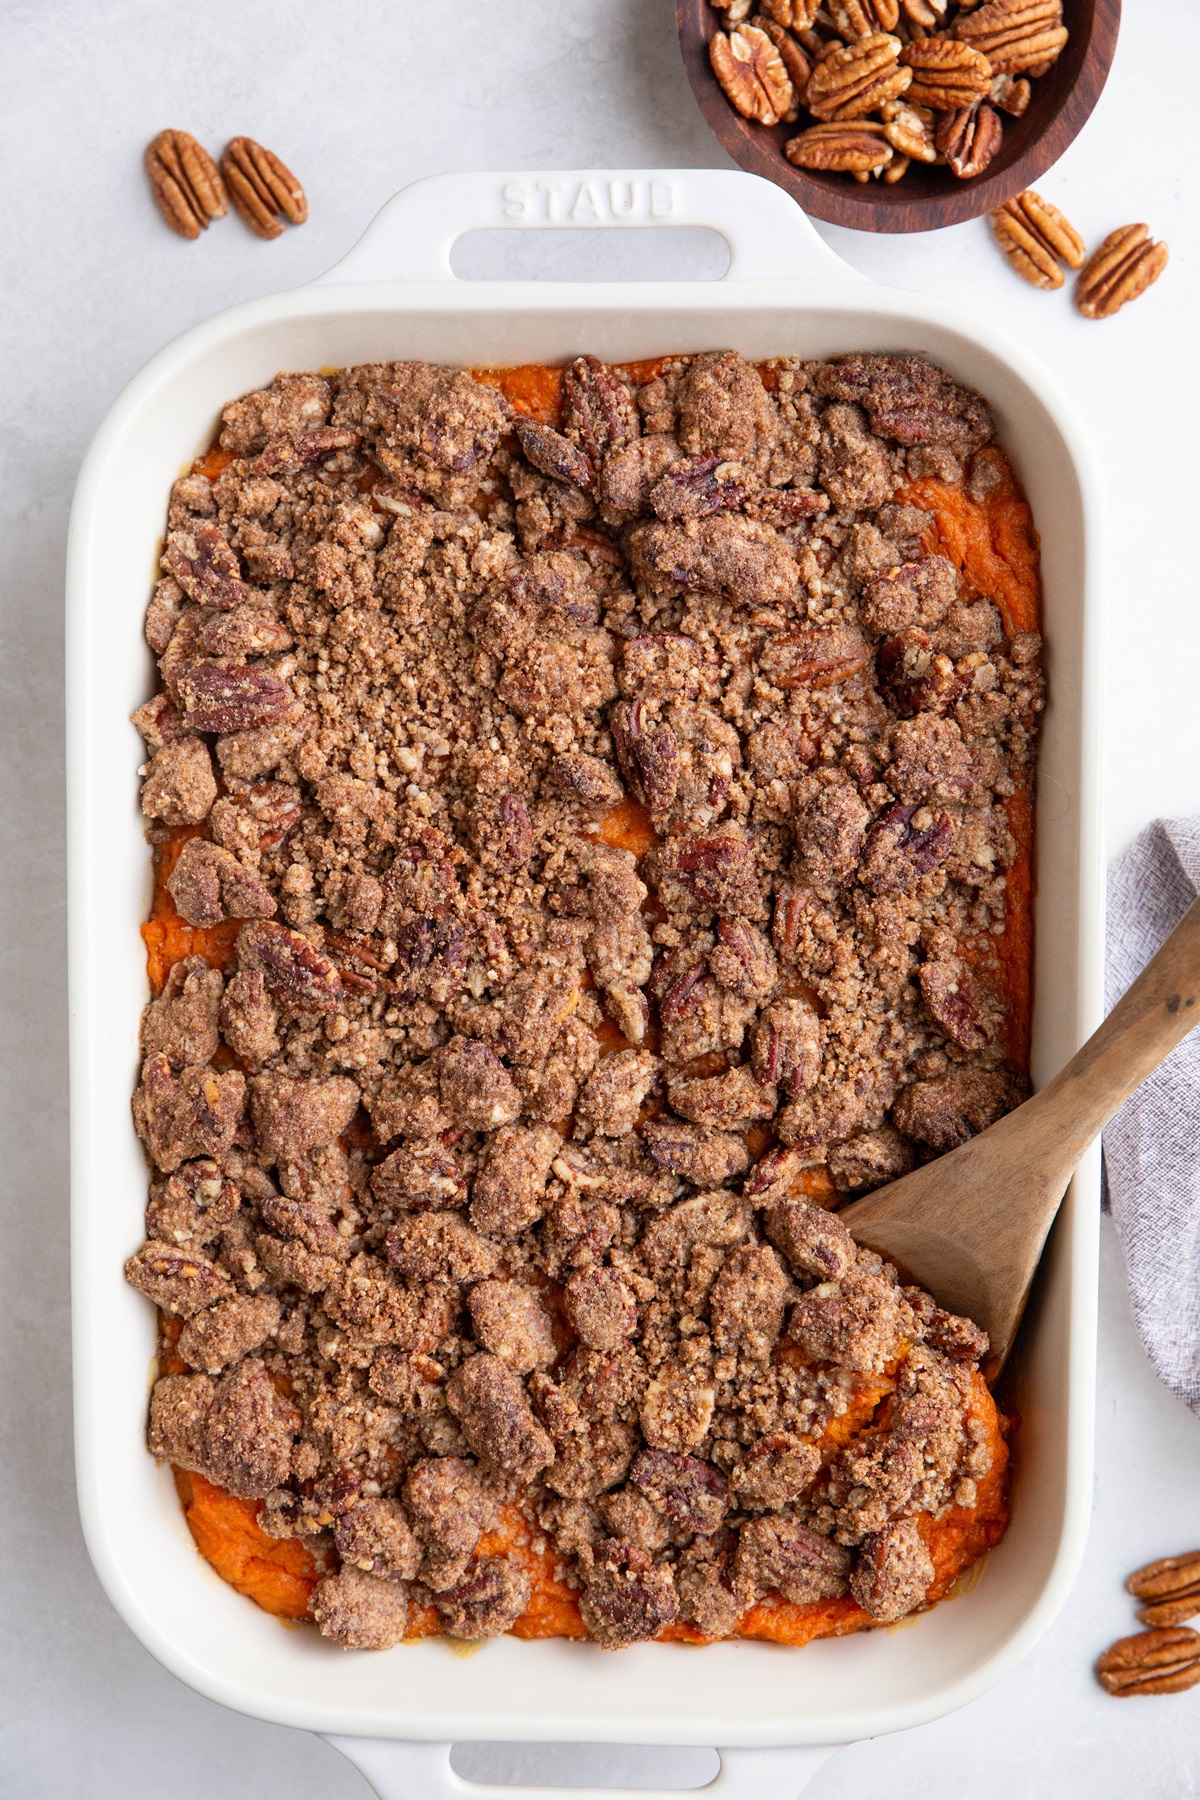 Finished sweet potato casserole on a white backdrop with fresh raw pecans scattered around.